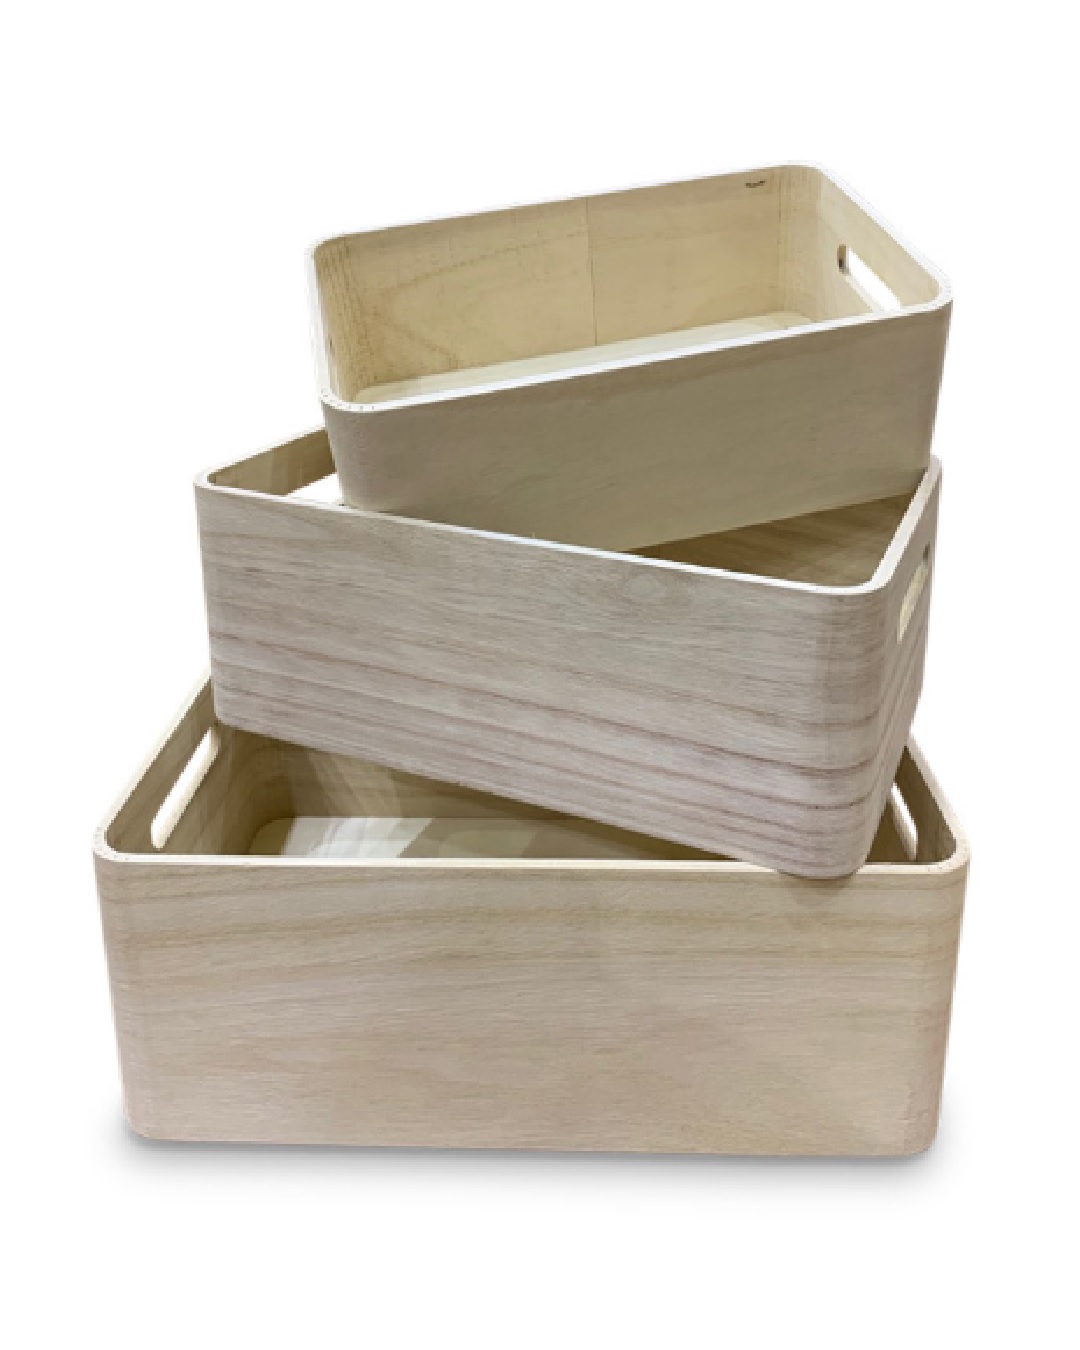 Rectangle wooden boxes with handles